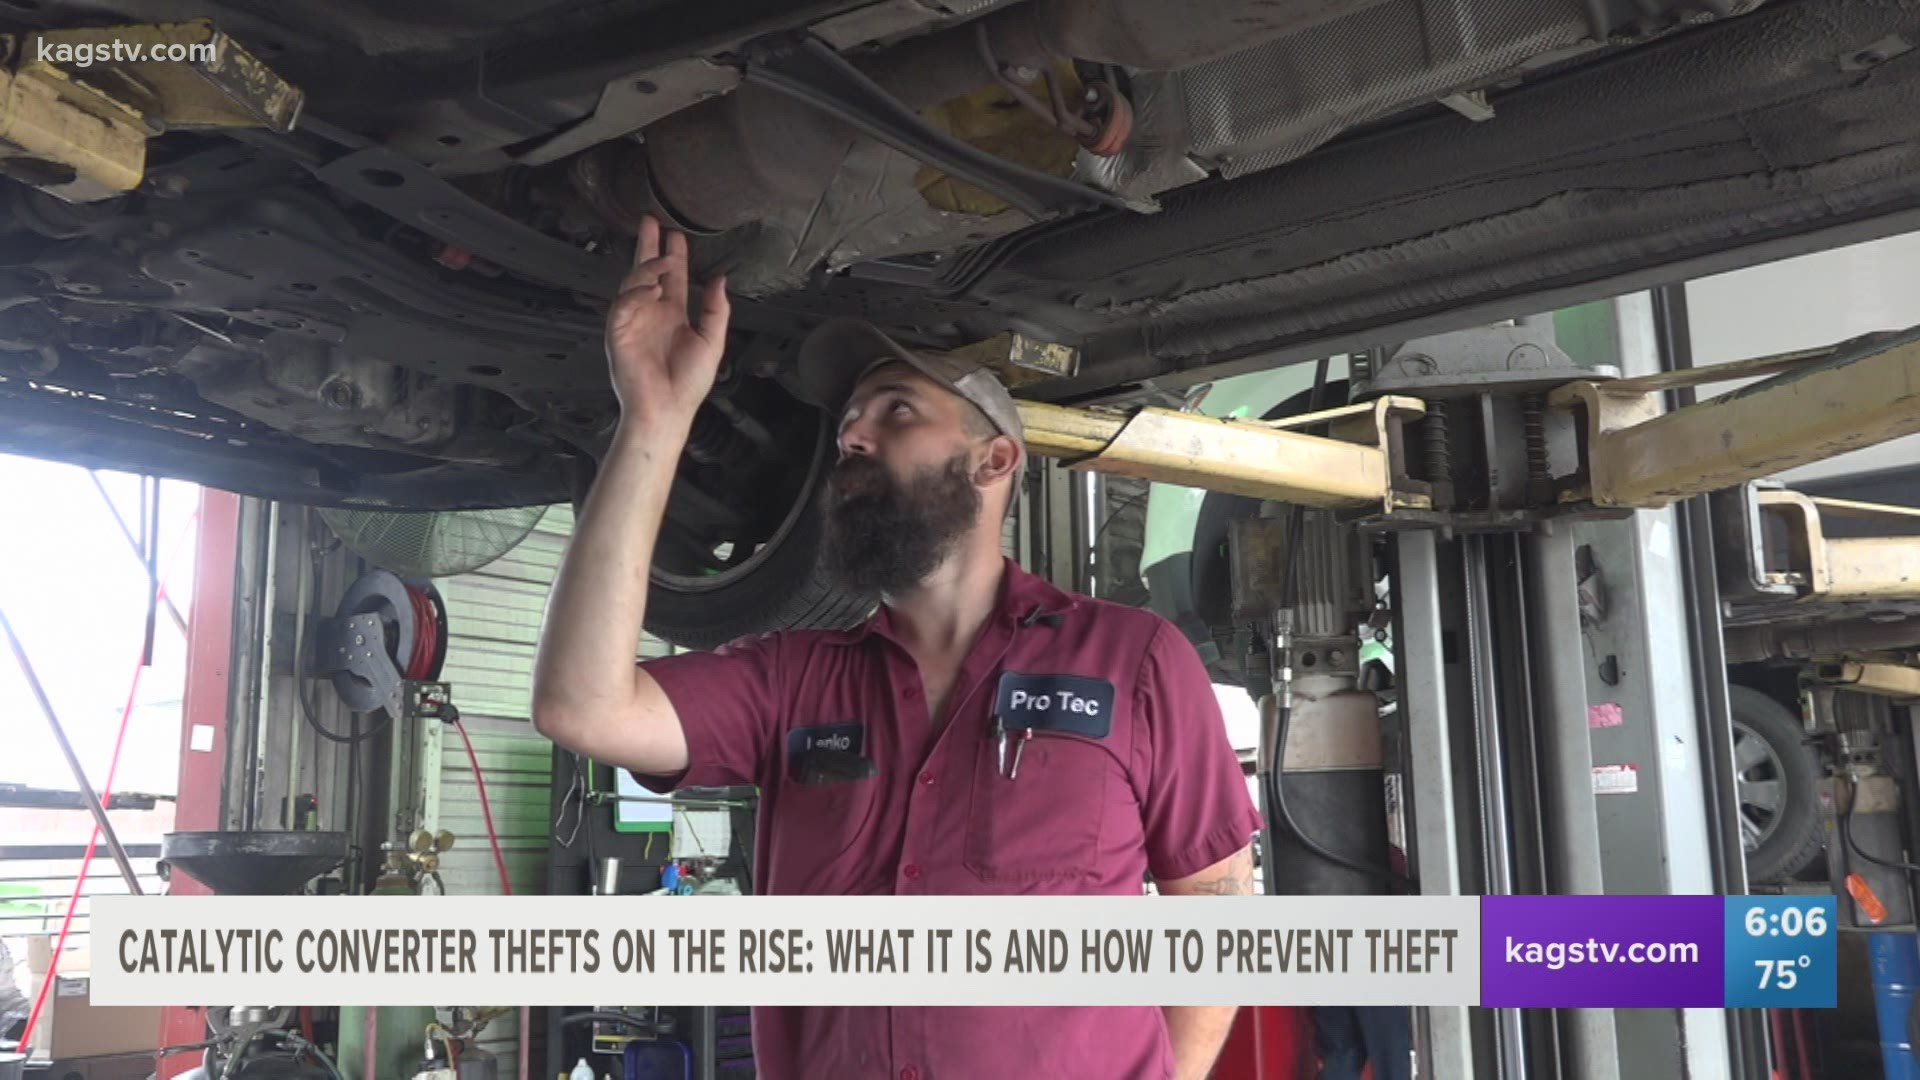 The police department said it can cost up to $4,000 to replace your stolen catalytic converter.